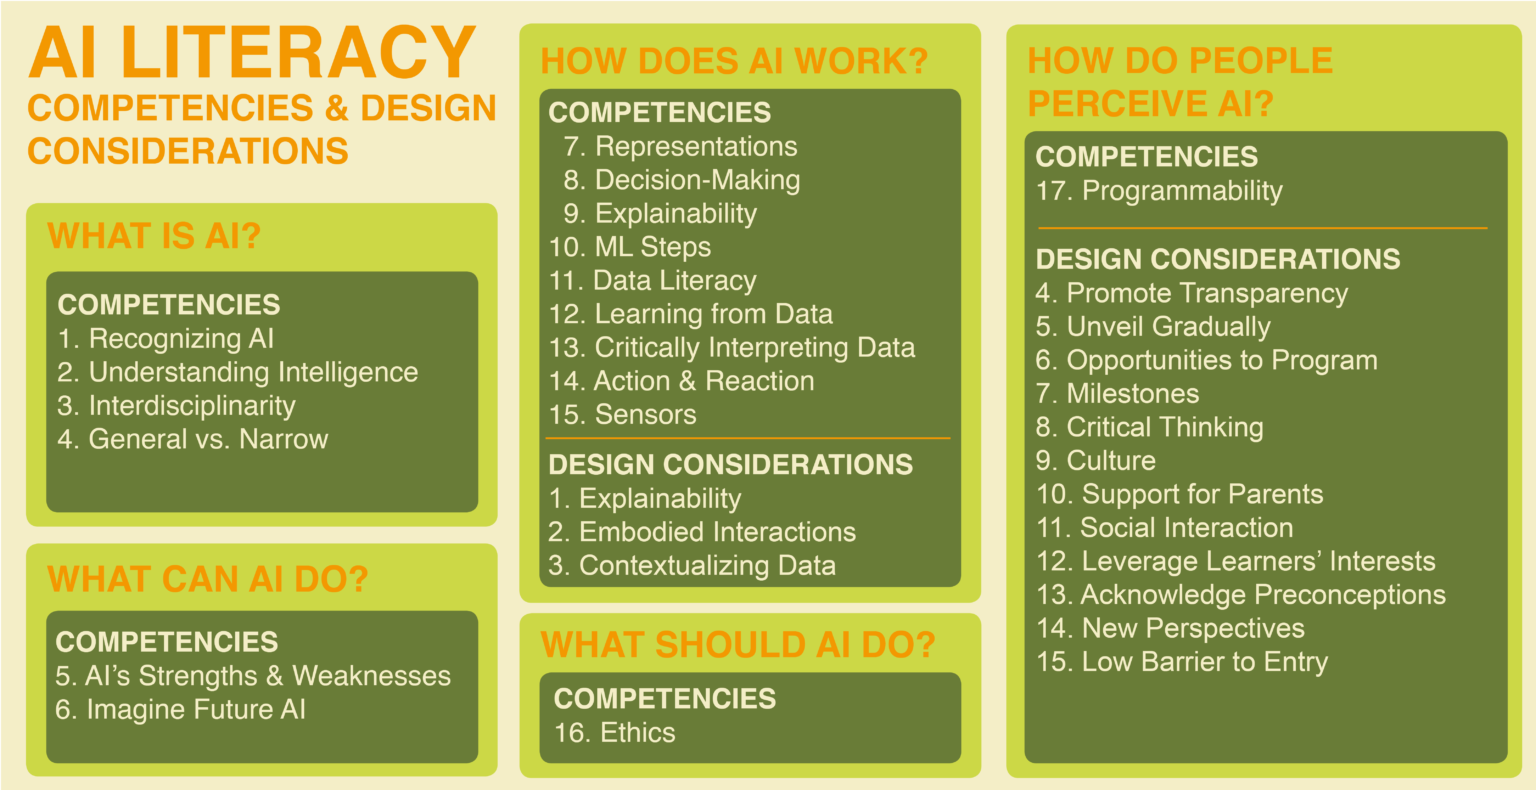 AI Unplugged's AI Literacy competencies and design considerations